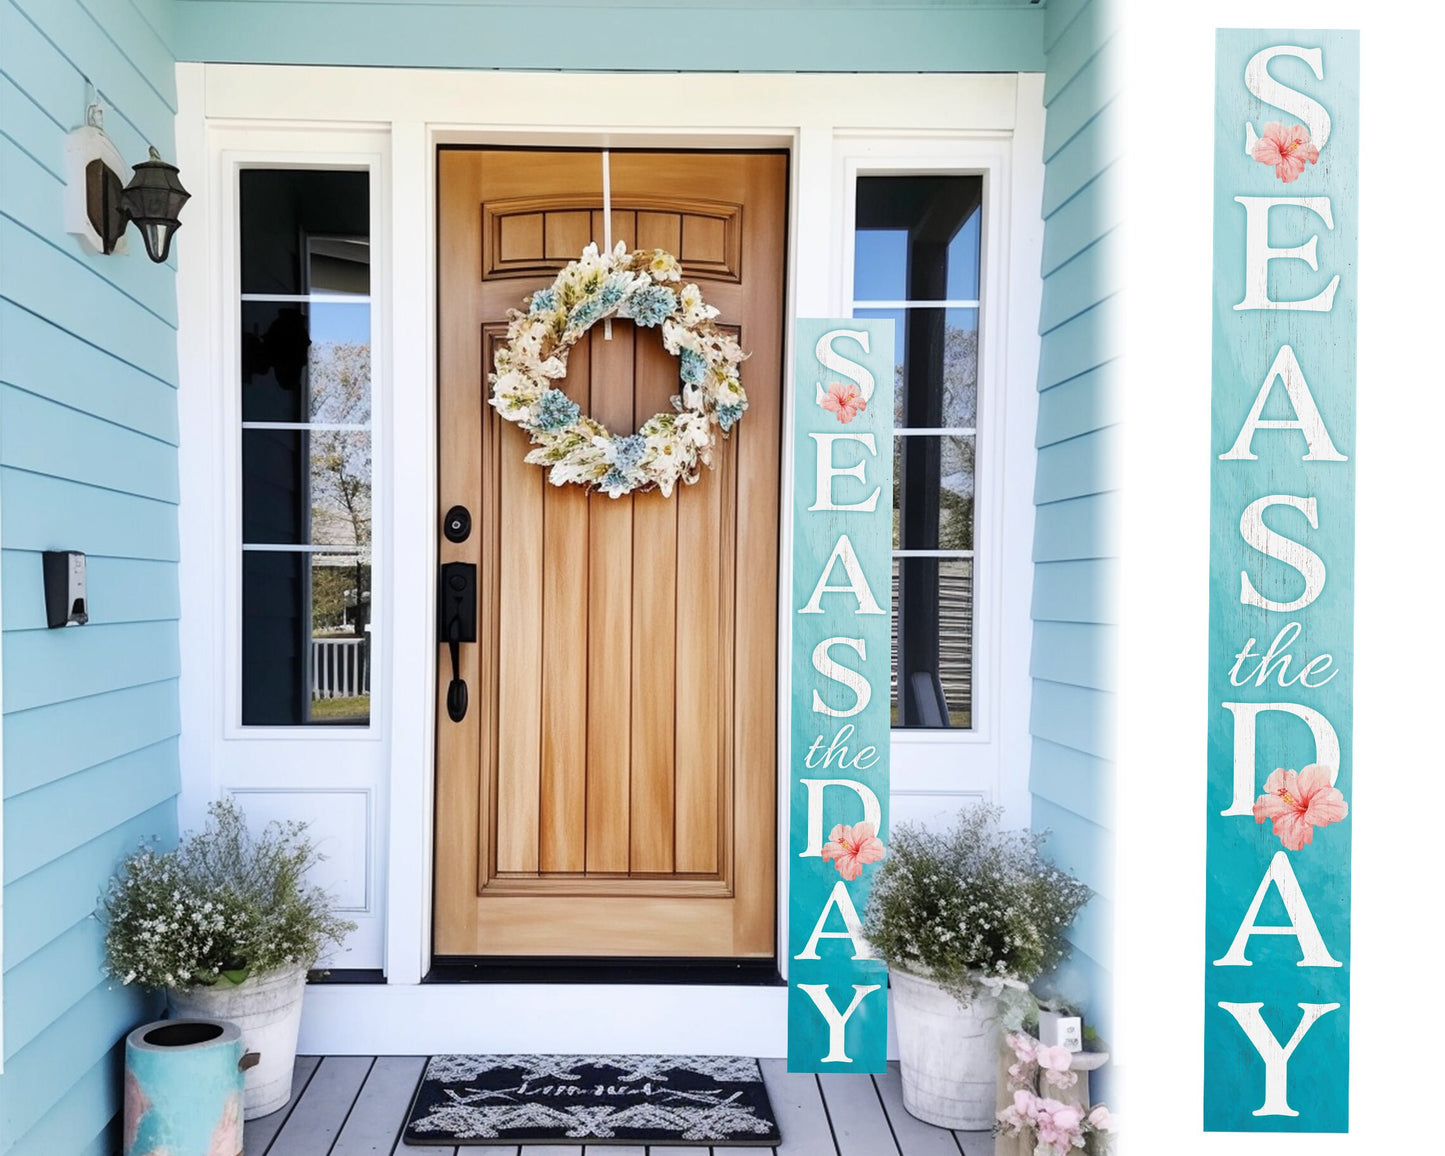 72in Seas the Day Outdoor Summer Sign | Front Door Porch Sign | Coastal Summer Welcome Sign | Farmhouse Home Decorations